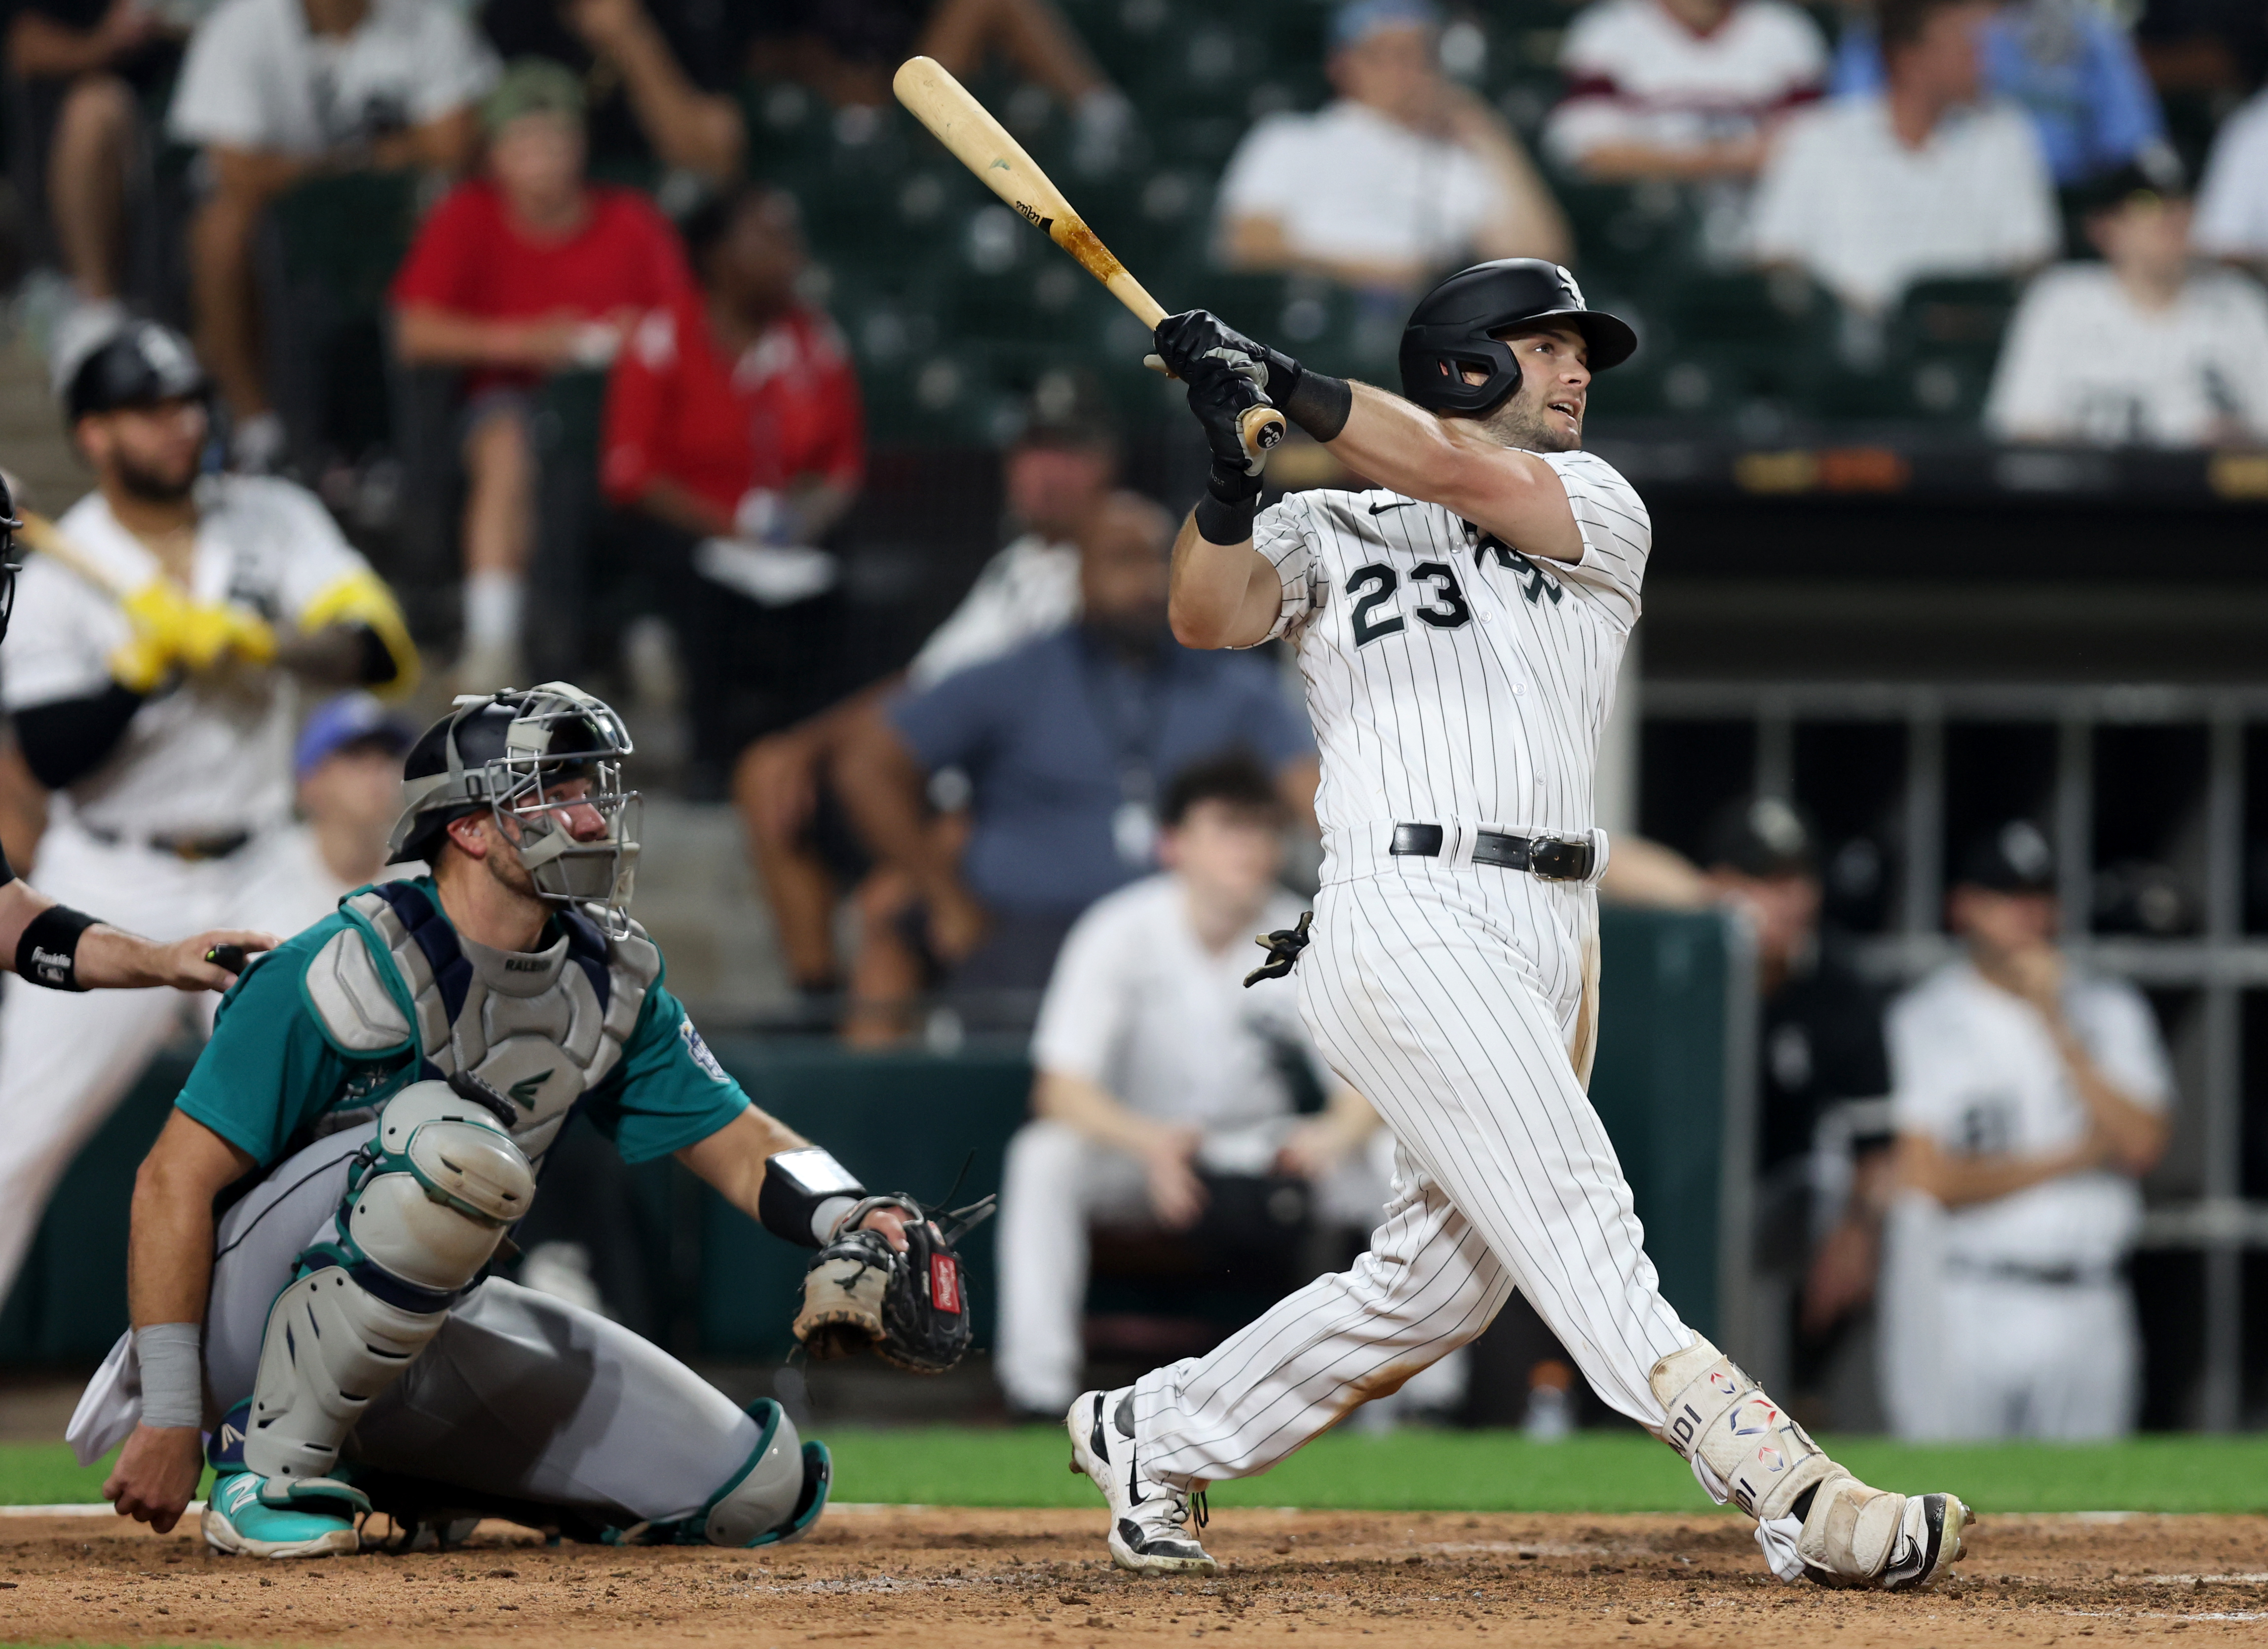 Why did White Sox Outfielder Andrew Benintendi play injured in